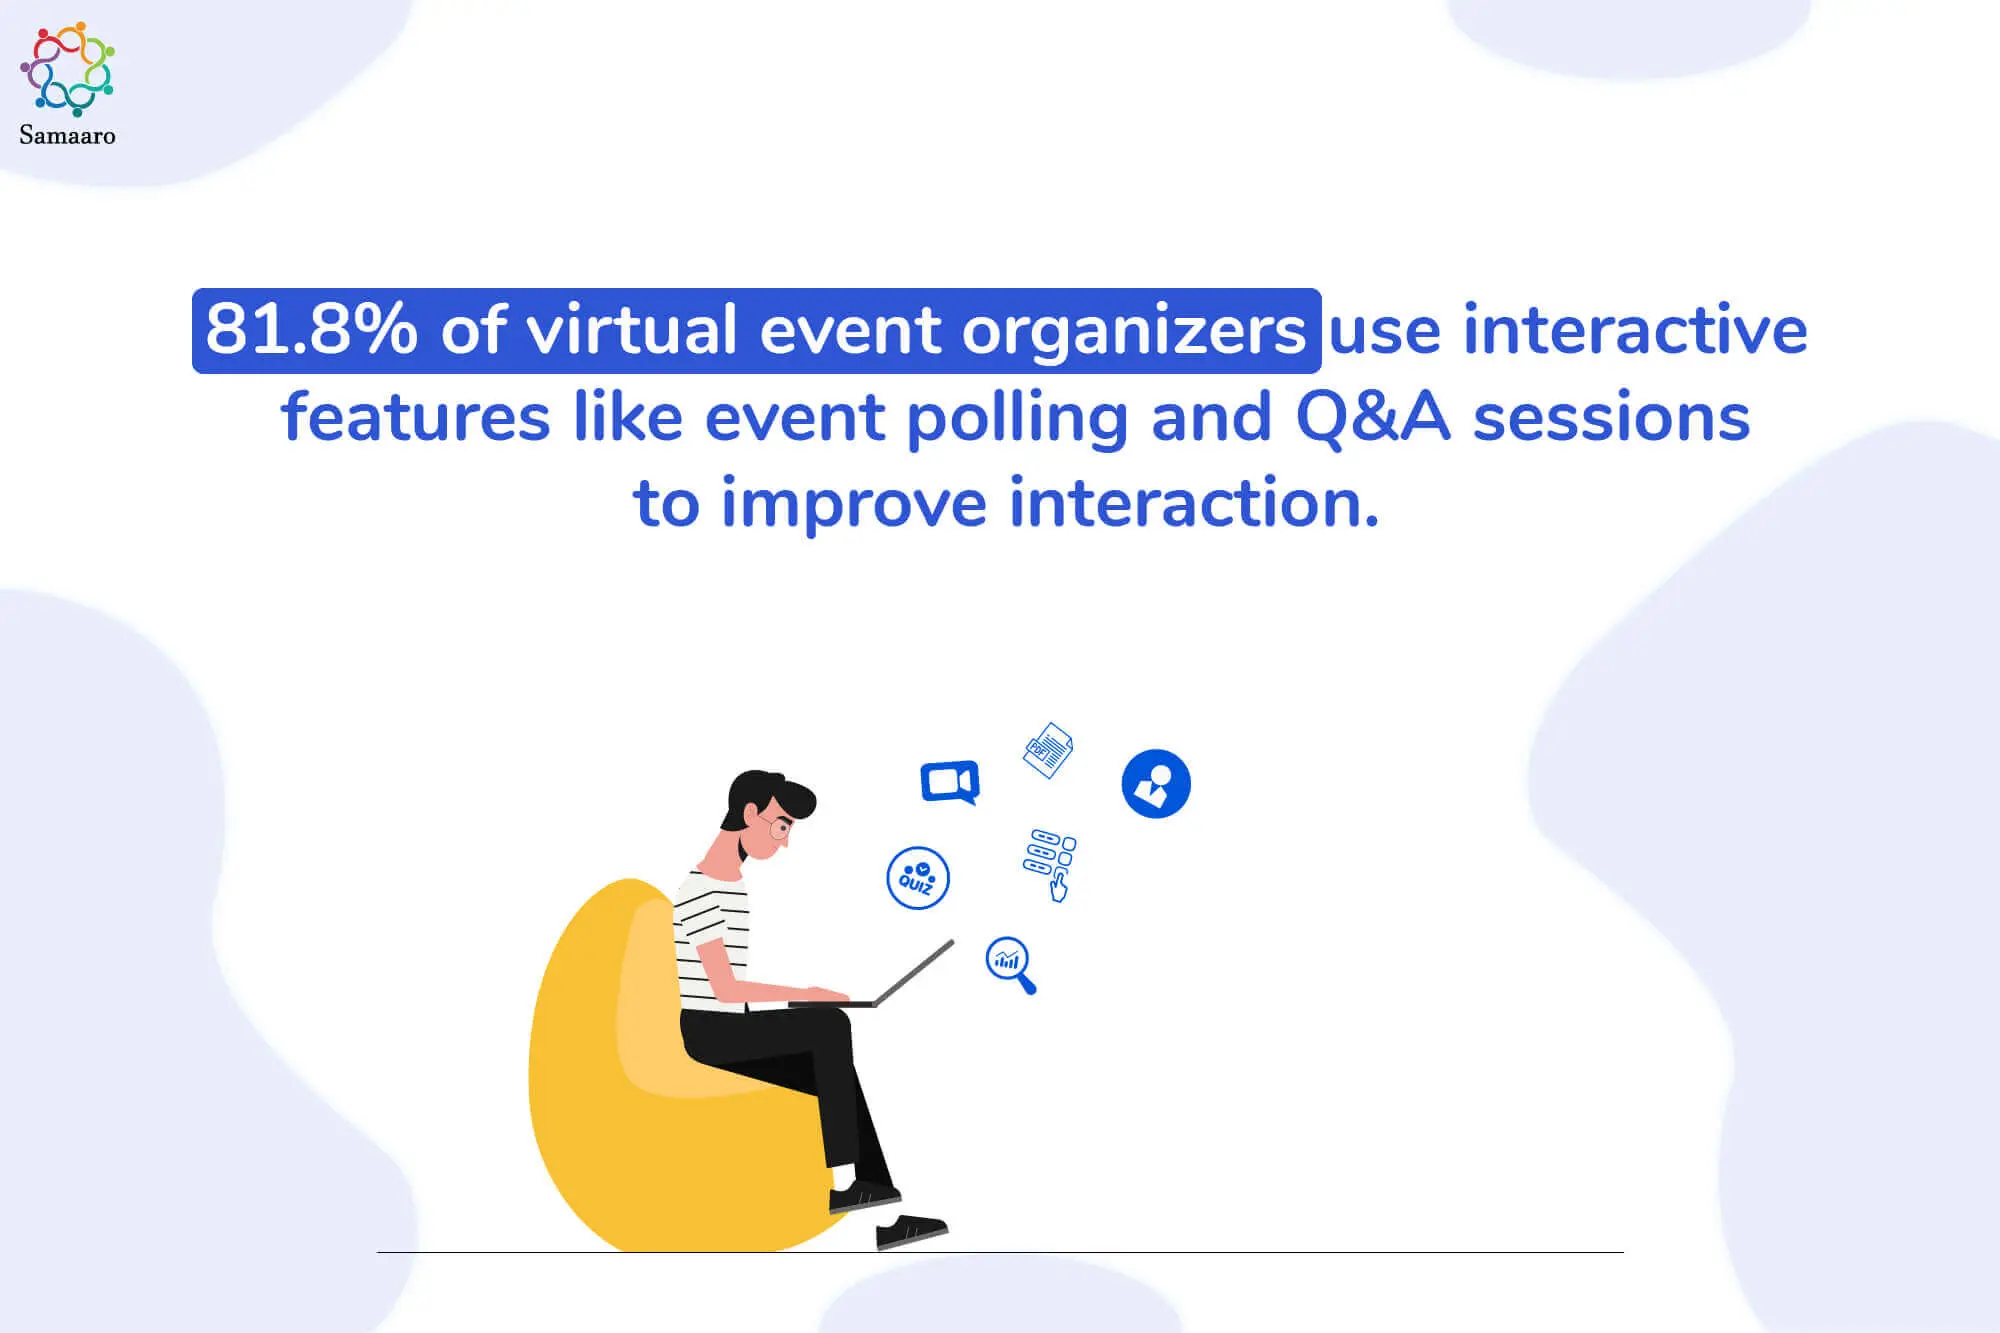 81.8% of virtual event organizers use polling and Q&A